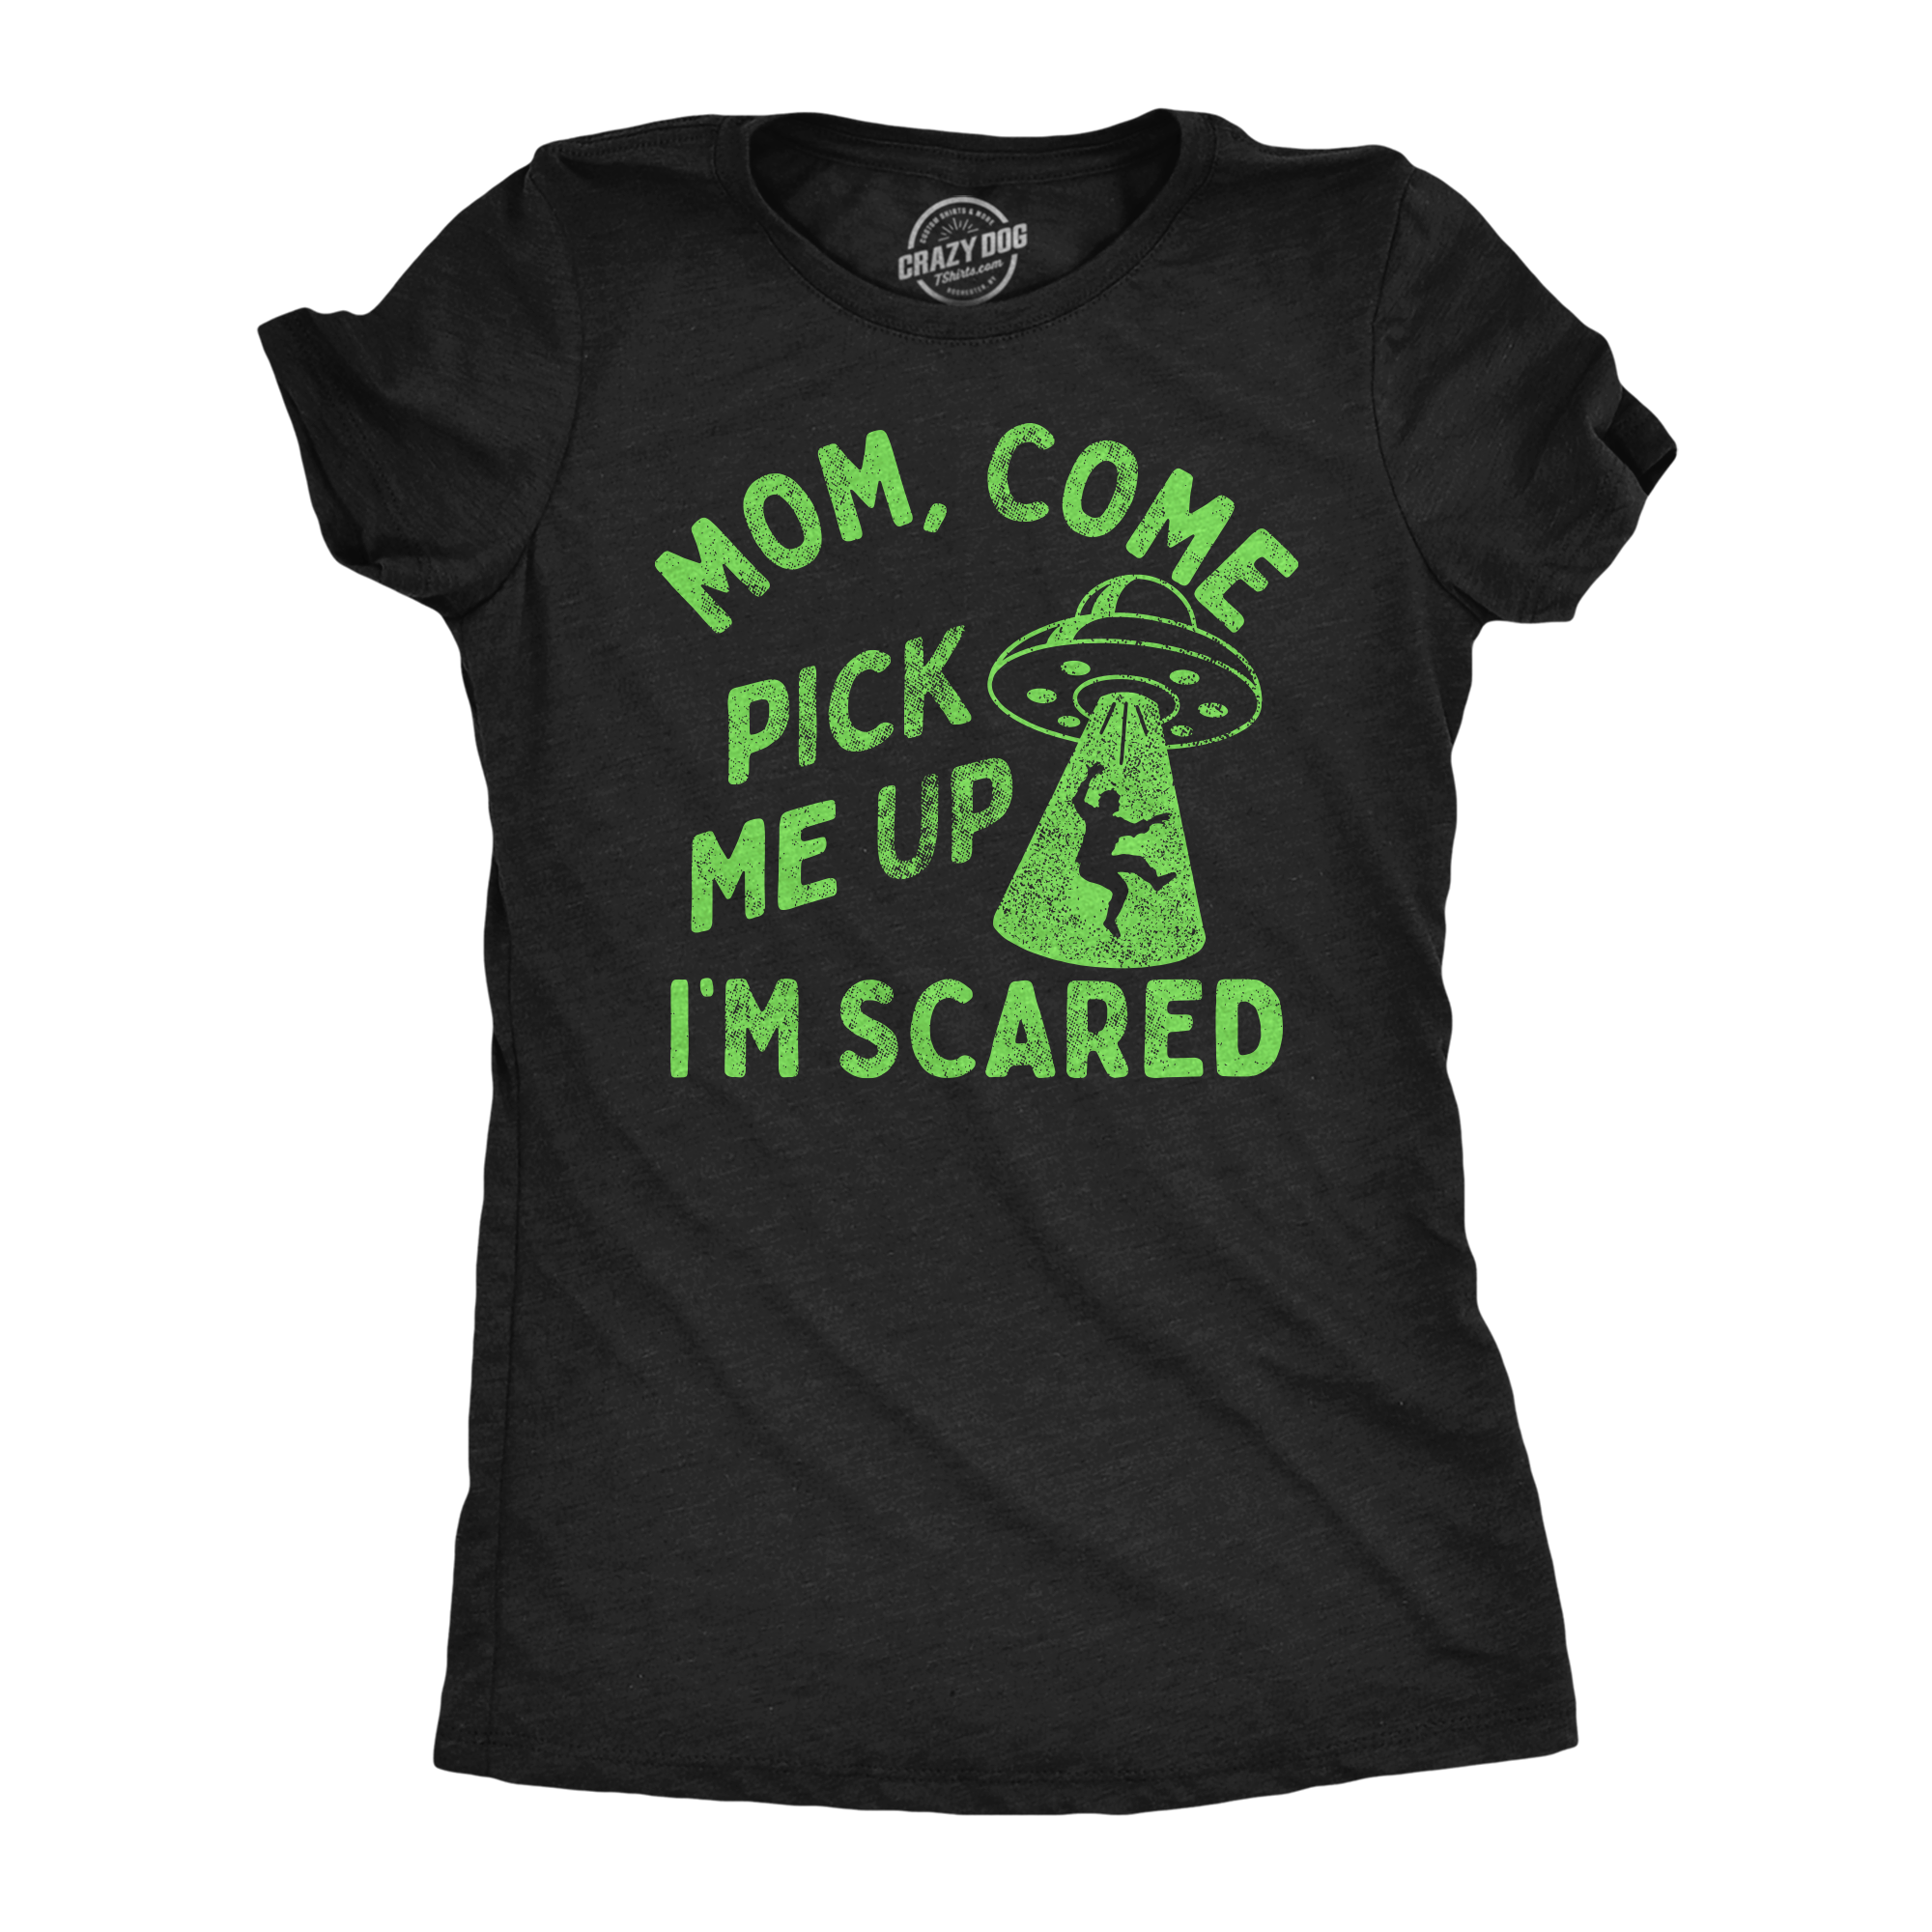 Funny Heather Black - Mom Come Pick Me Up Mom Come Pick Me Up Im Scared Womens T Shirt Nerdy space sarcastic Tee